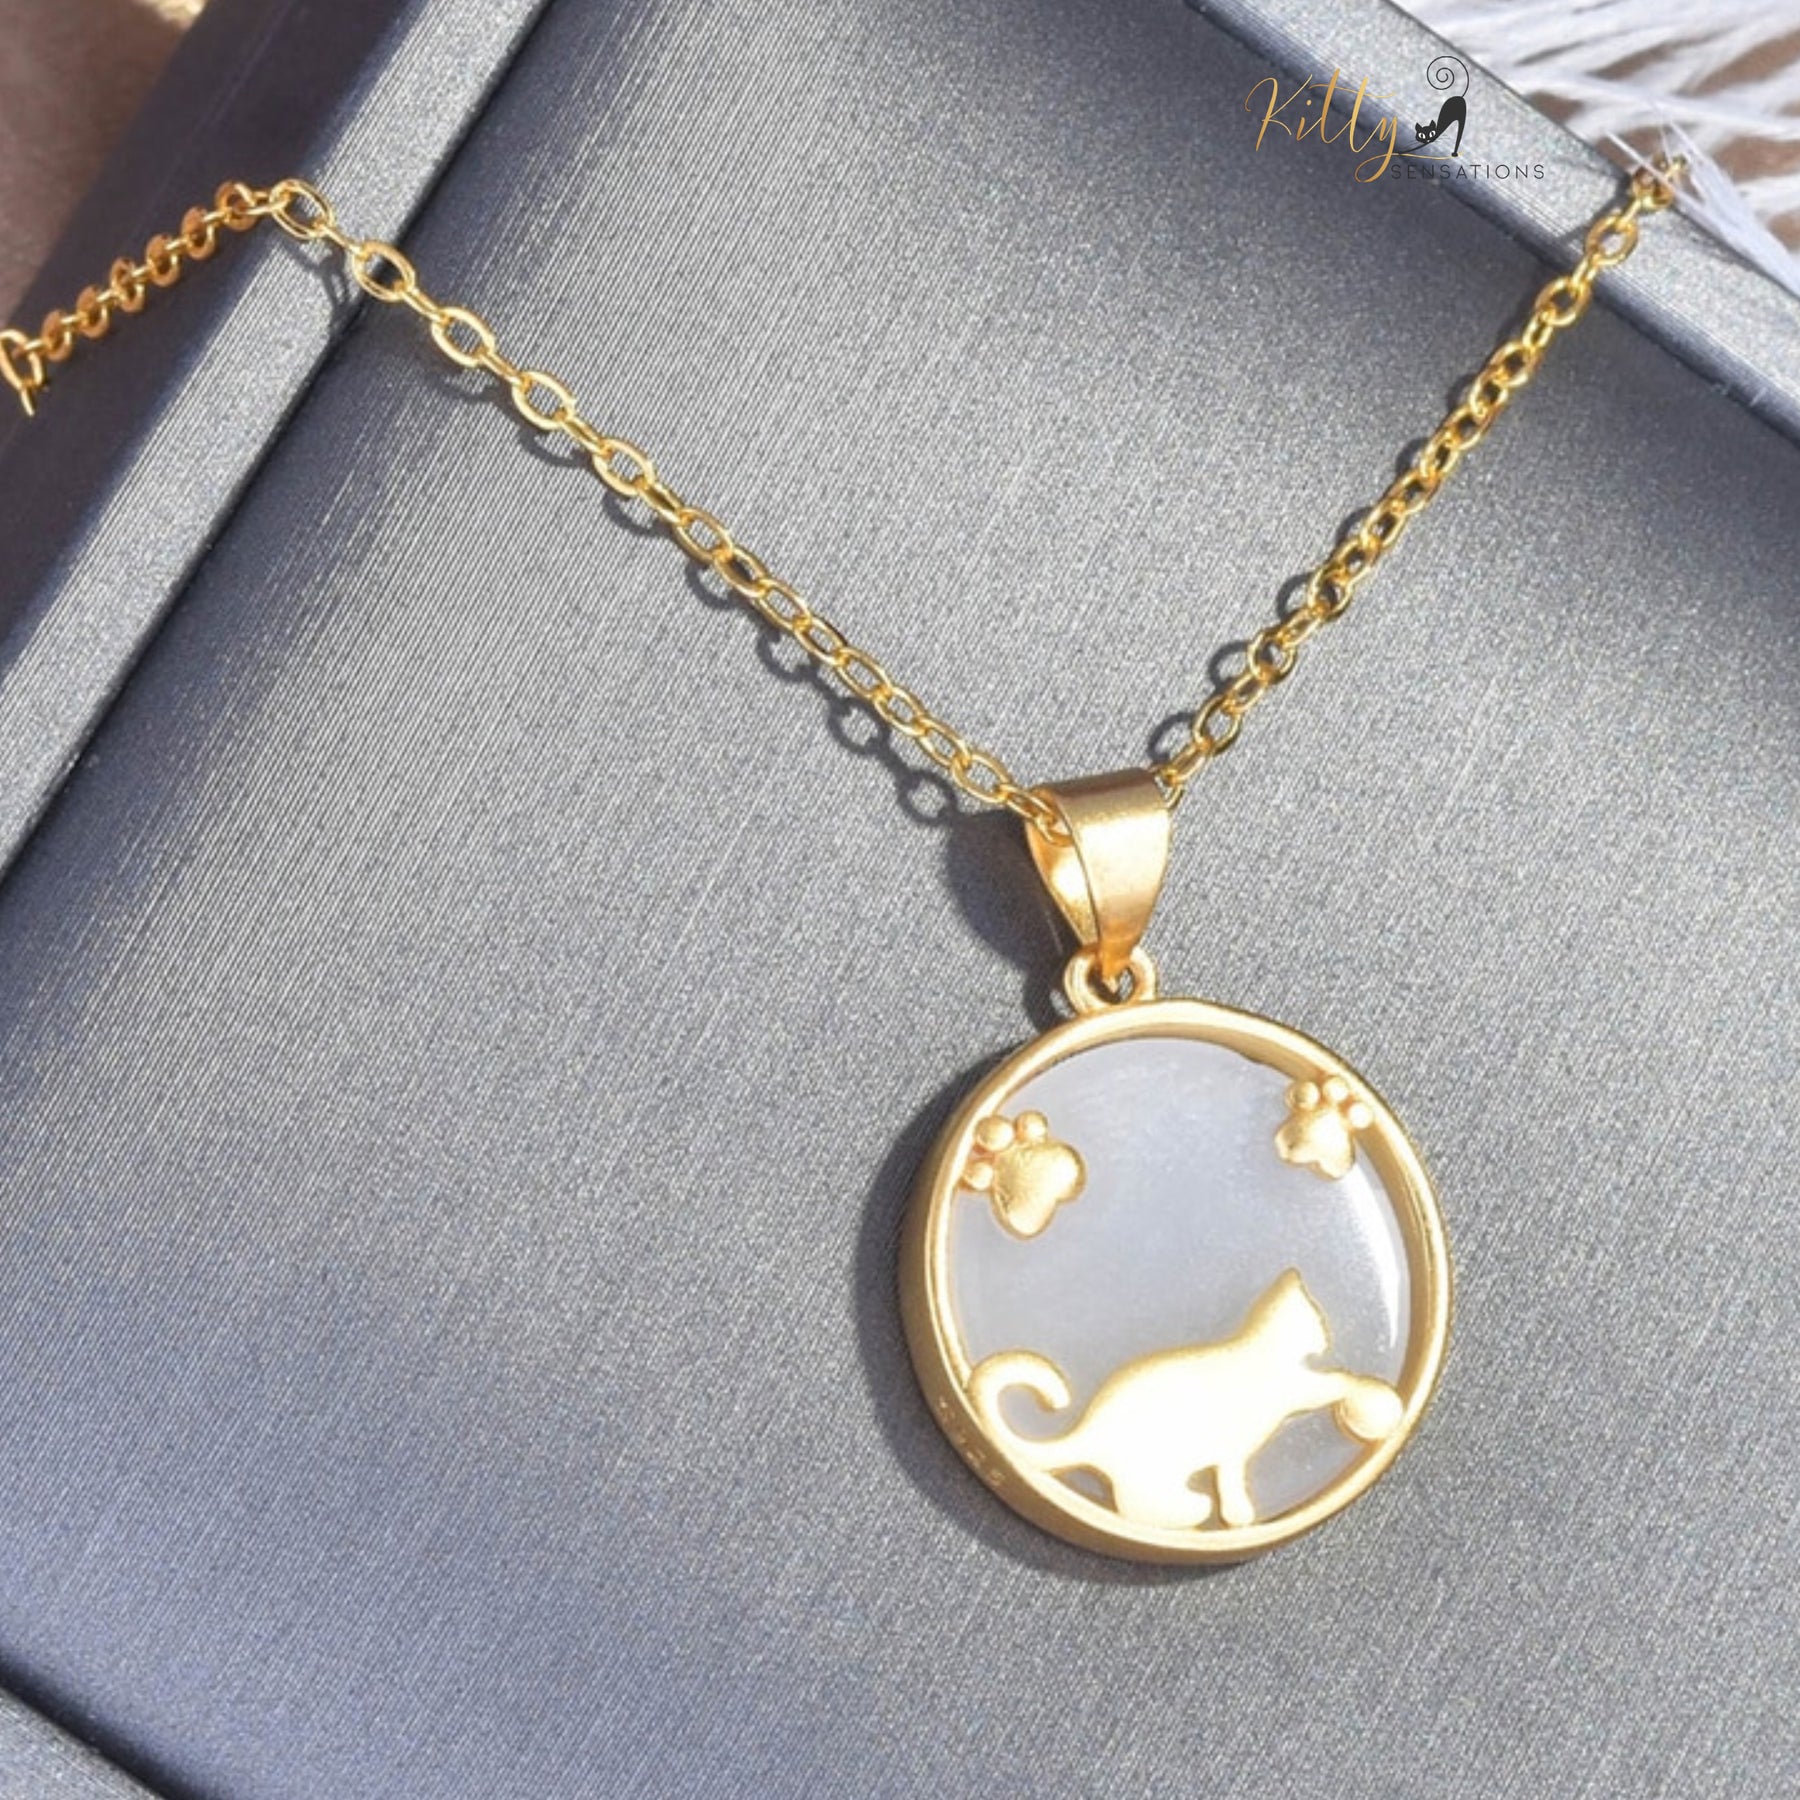 Playful Cat Natural Jade Necklace in Solid 925 Sterling Silver (Gold Plated) ($48.32): https://www.kittysensations.com/products/playful-cat-natural-jade-necklace-in-solid-925-sterling-silver-gold-plated?_pos=2&_psq=PLAYFUL+CAT+JADE&_ss=e&_v=1.0